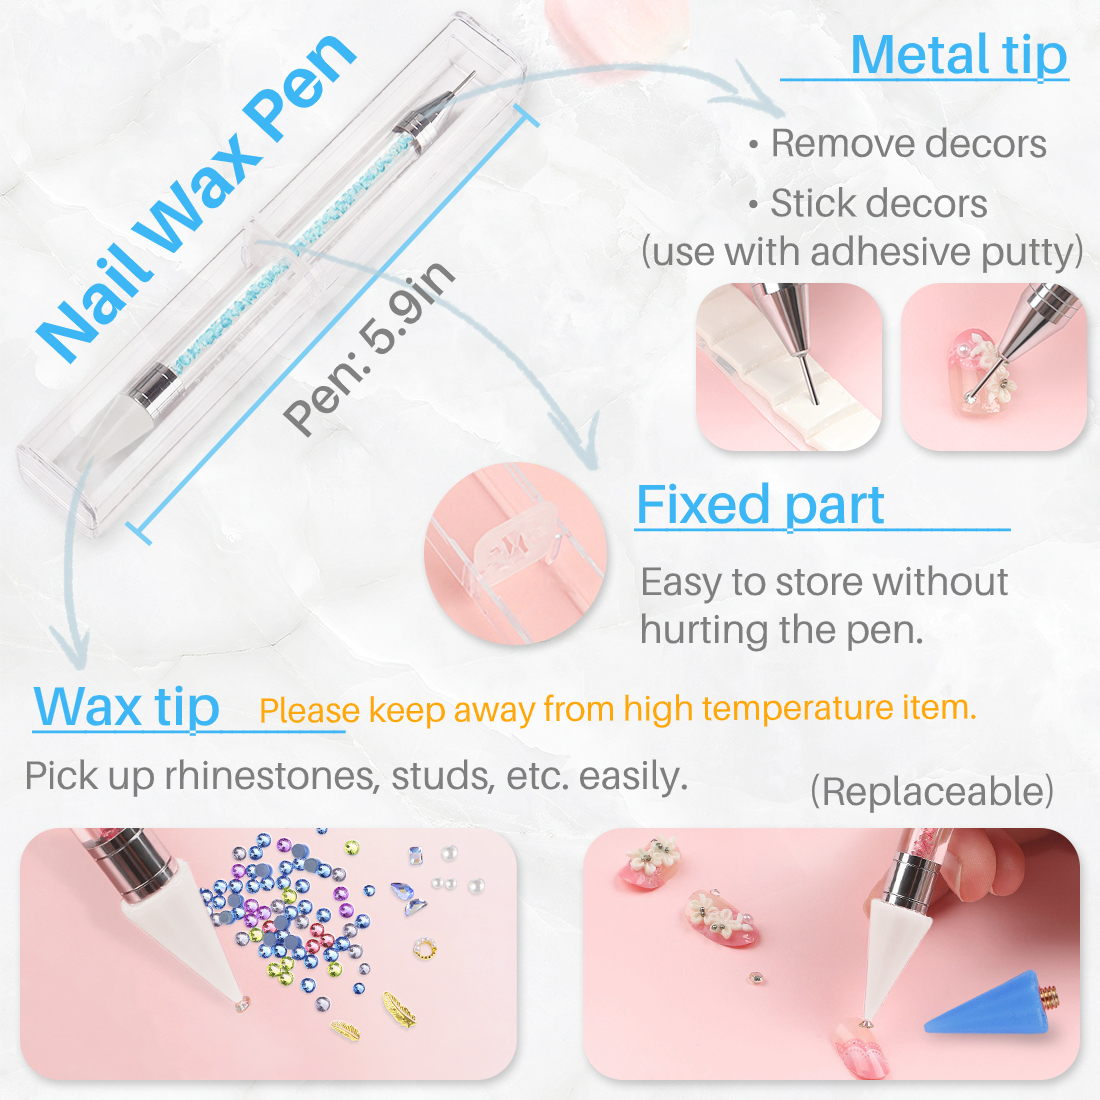 BeautyQua Combo of 2 Best Professional Soft Nail Art Brush Pen Dust  Cleaning Frosted Handle Gradient Brush Powder Removal Manicure Makeup Tools  - Price in India, Buy BeautyQua Combo of 2 Best